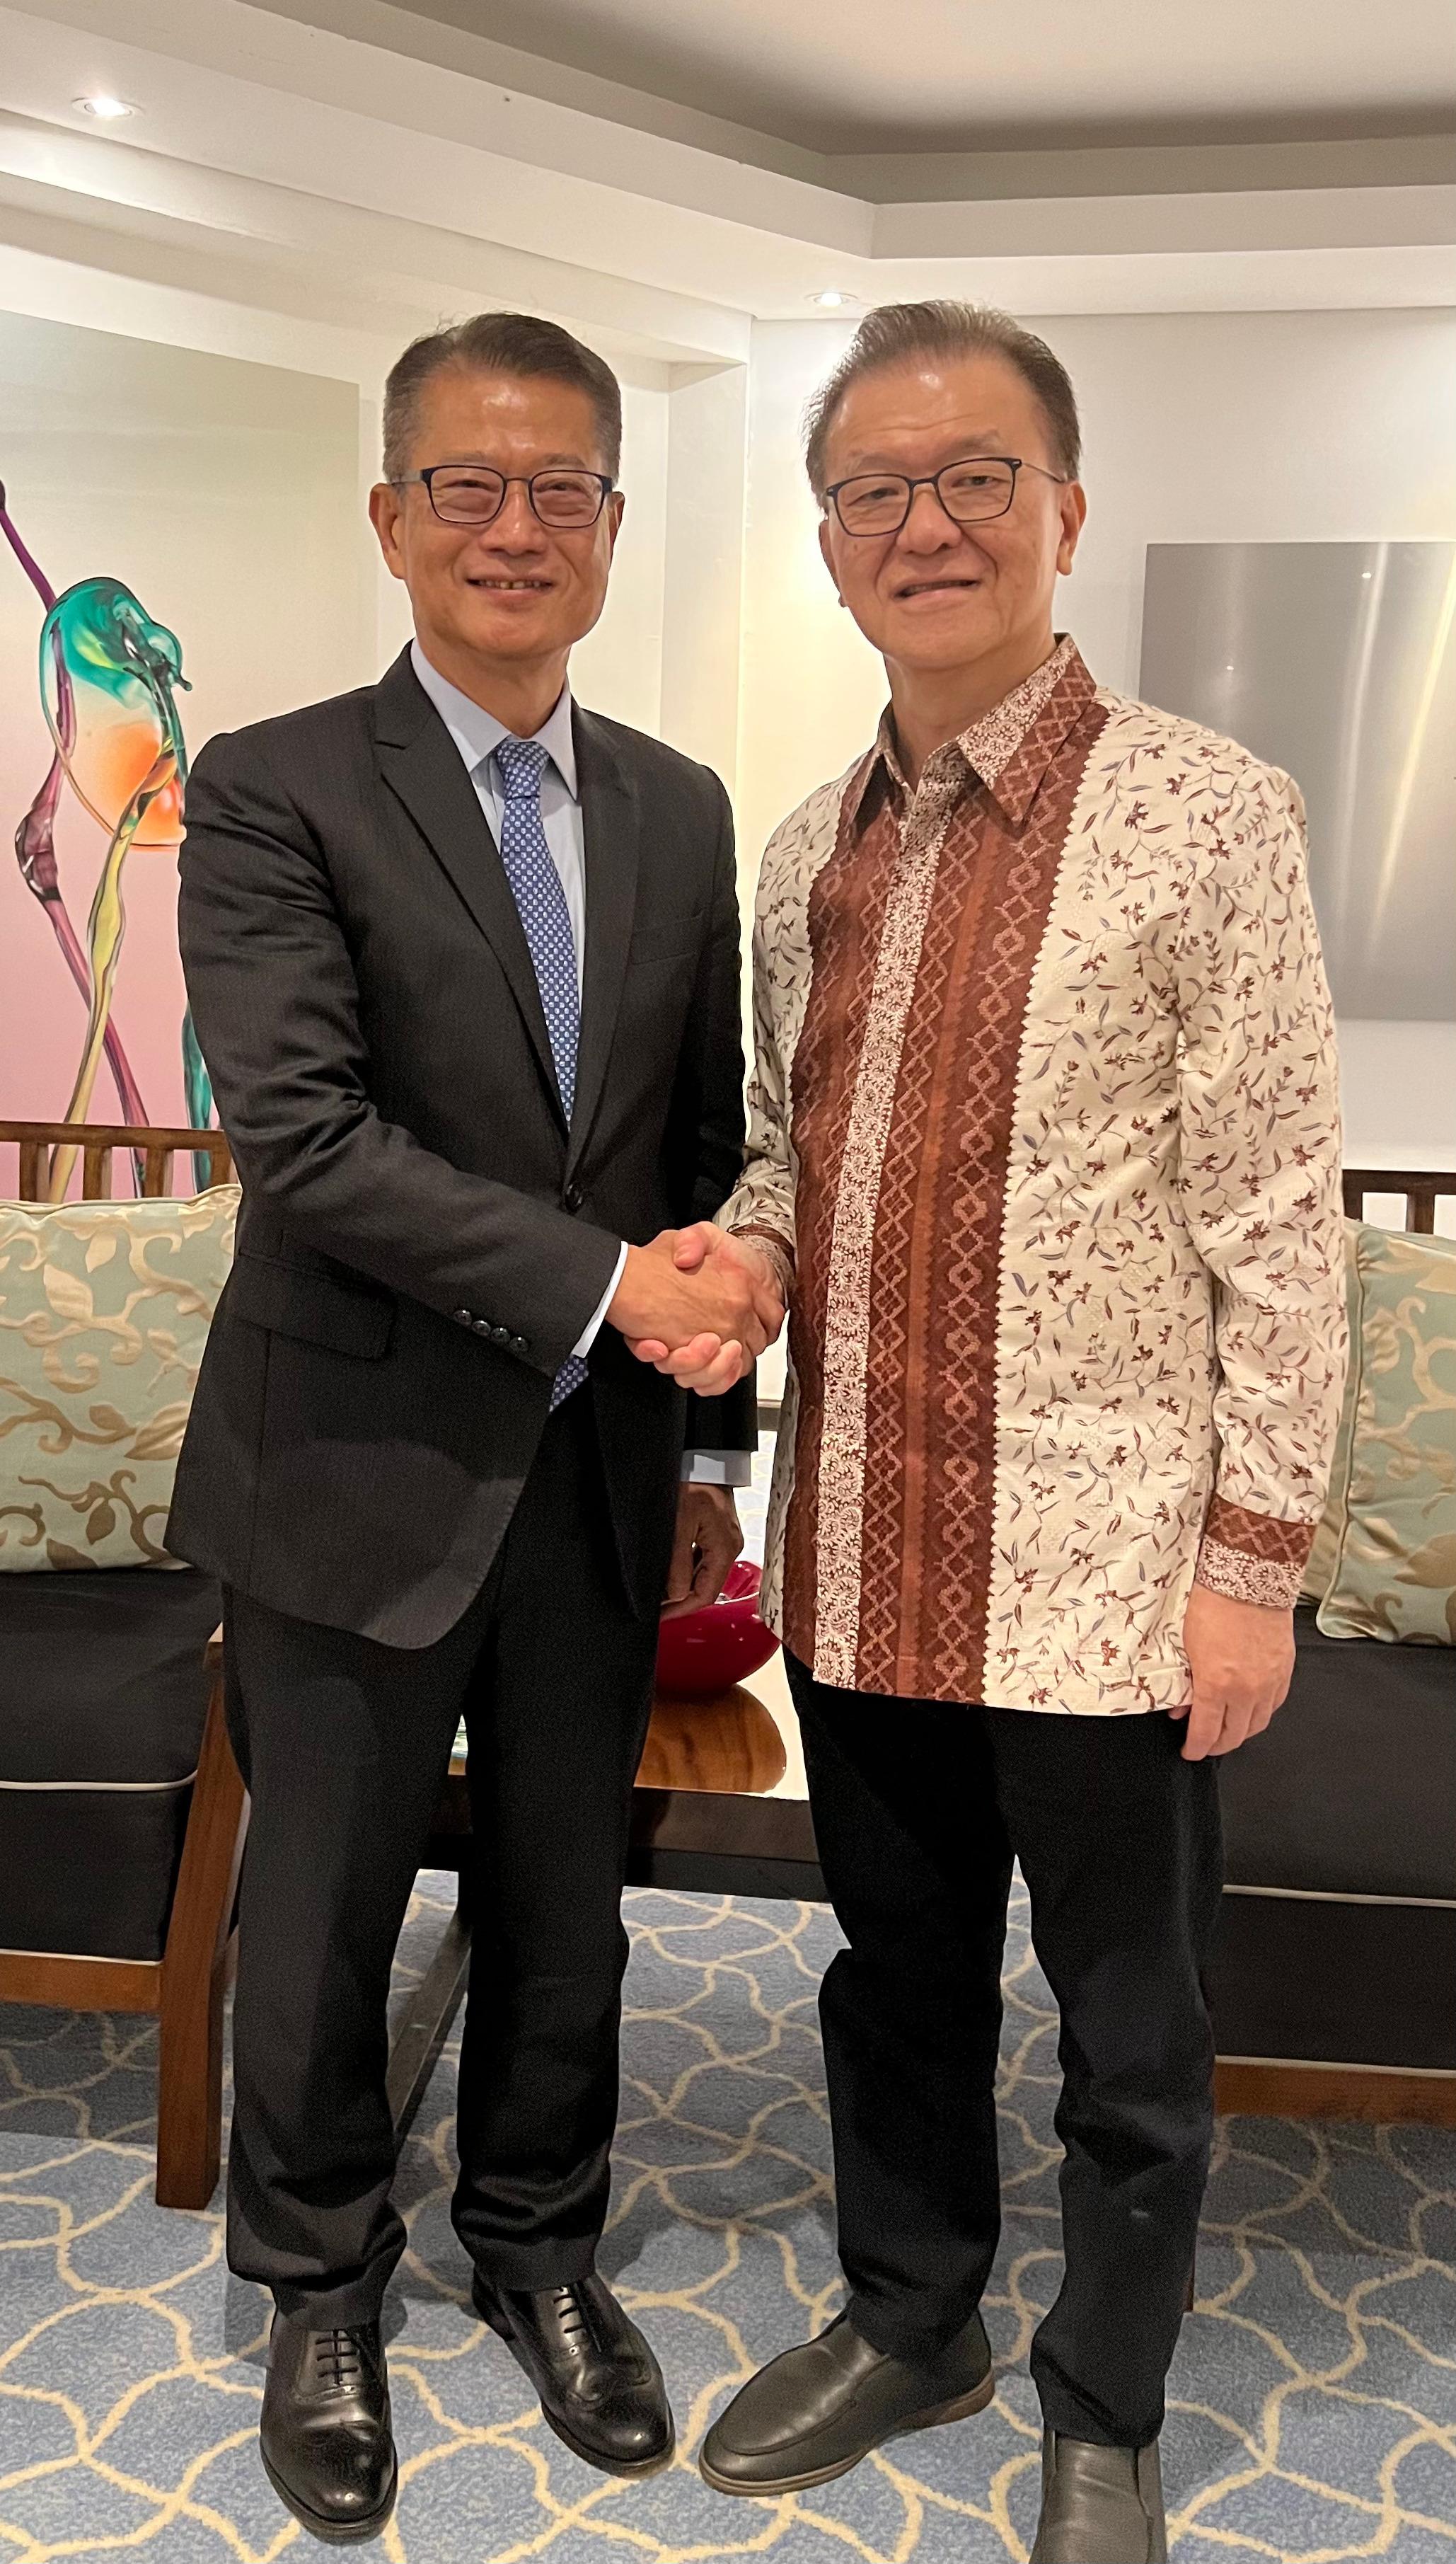 The Financial Secretary, Mr Paul Chan, today (November 15) attended the Group of Twenty (G20) Leaders' Summit in Bali, Indonesia, as part of the delegation of the People's Republic of China. Photo shows Mr Chan (left) meeting with the Chairman and CEO of Sinar Mas, Mr Franky Widjaja (right), after attending the summit.